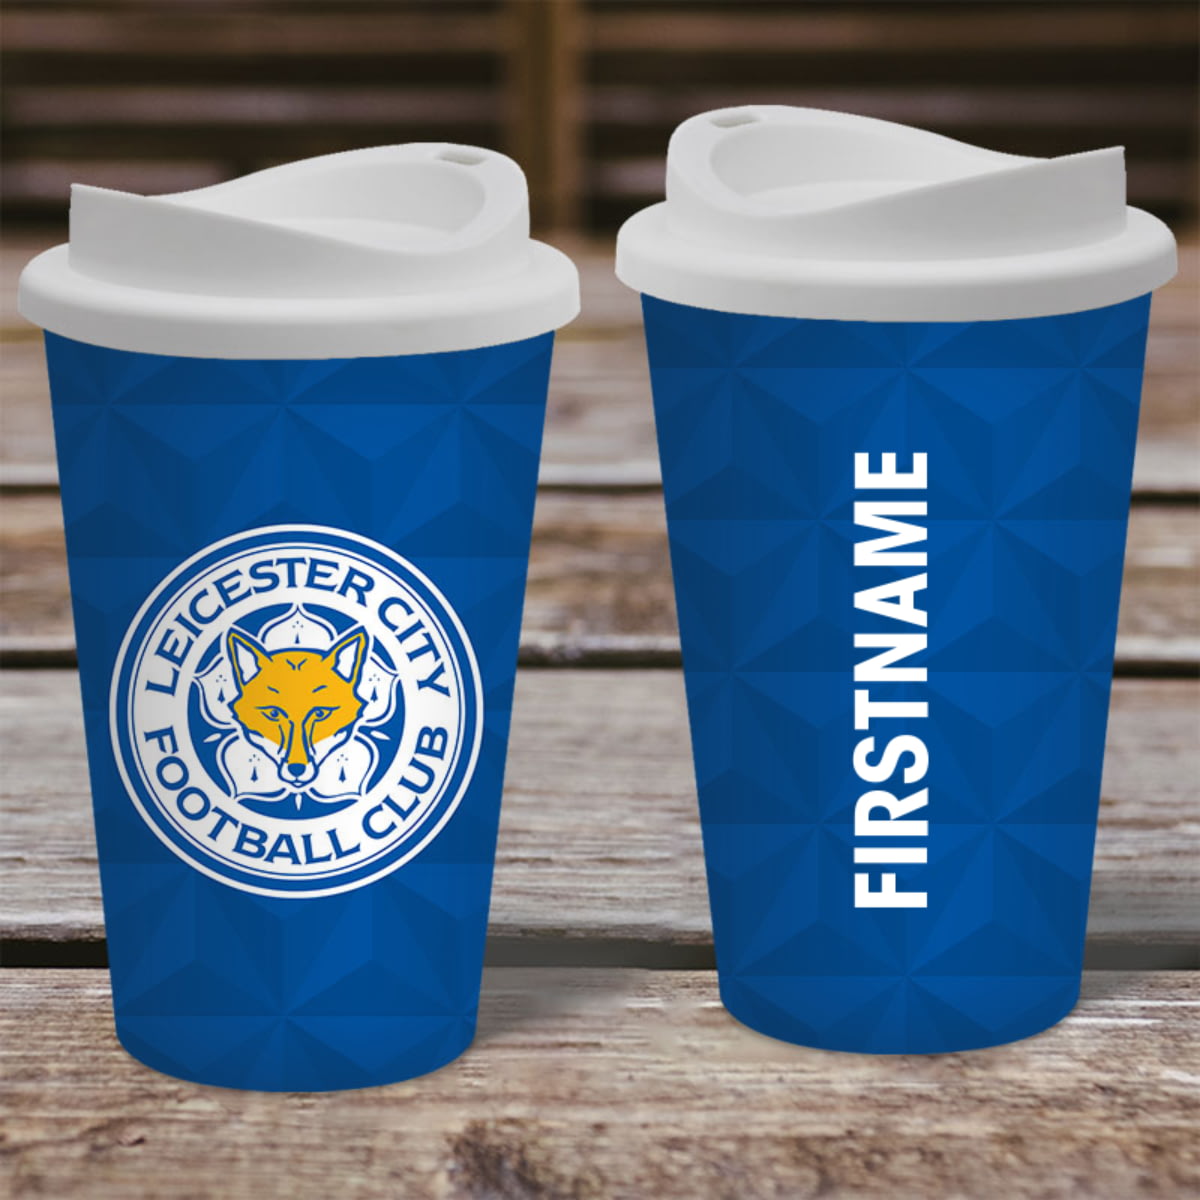 Personalised Leicester City FC Crest Reusable Coffee Cup Mug